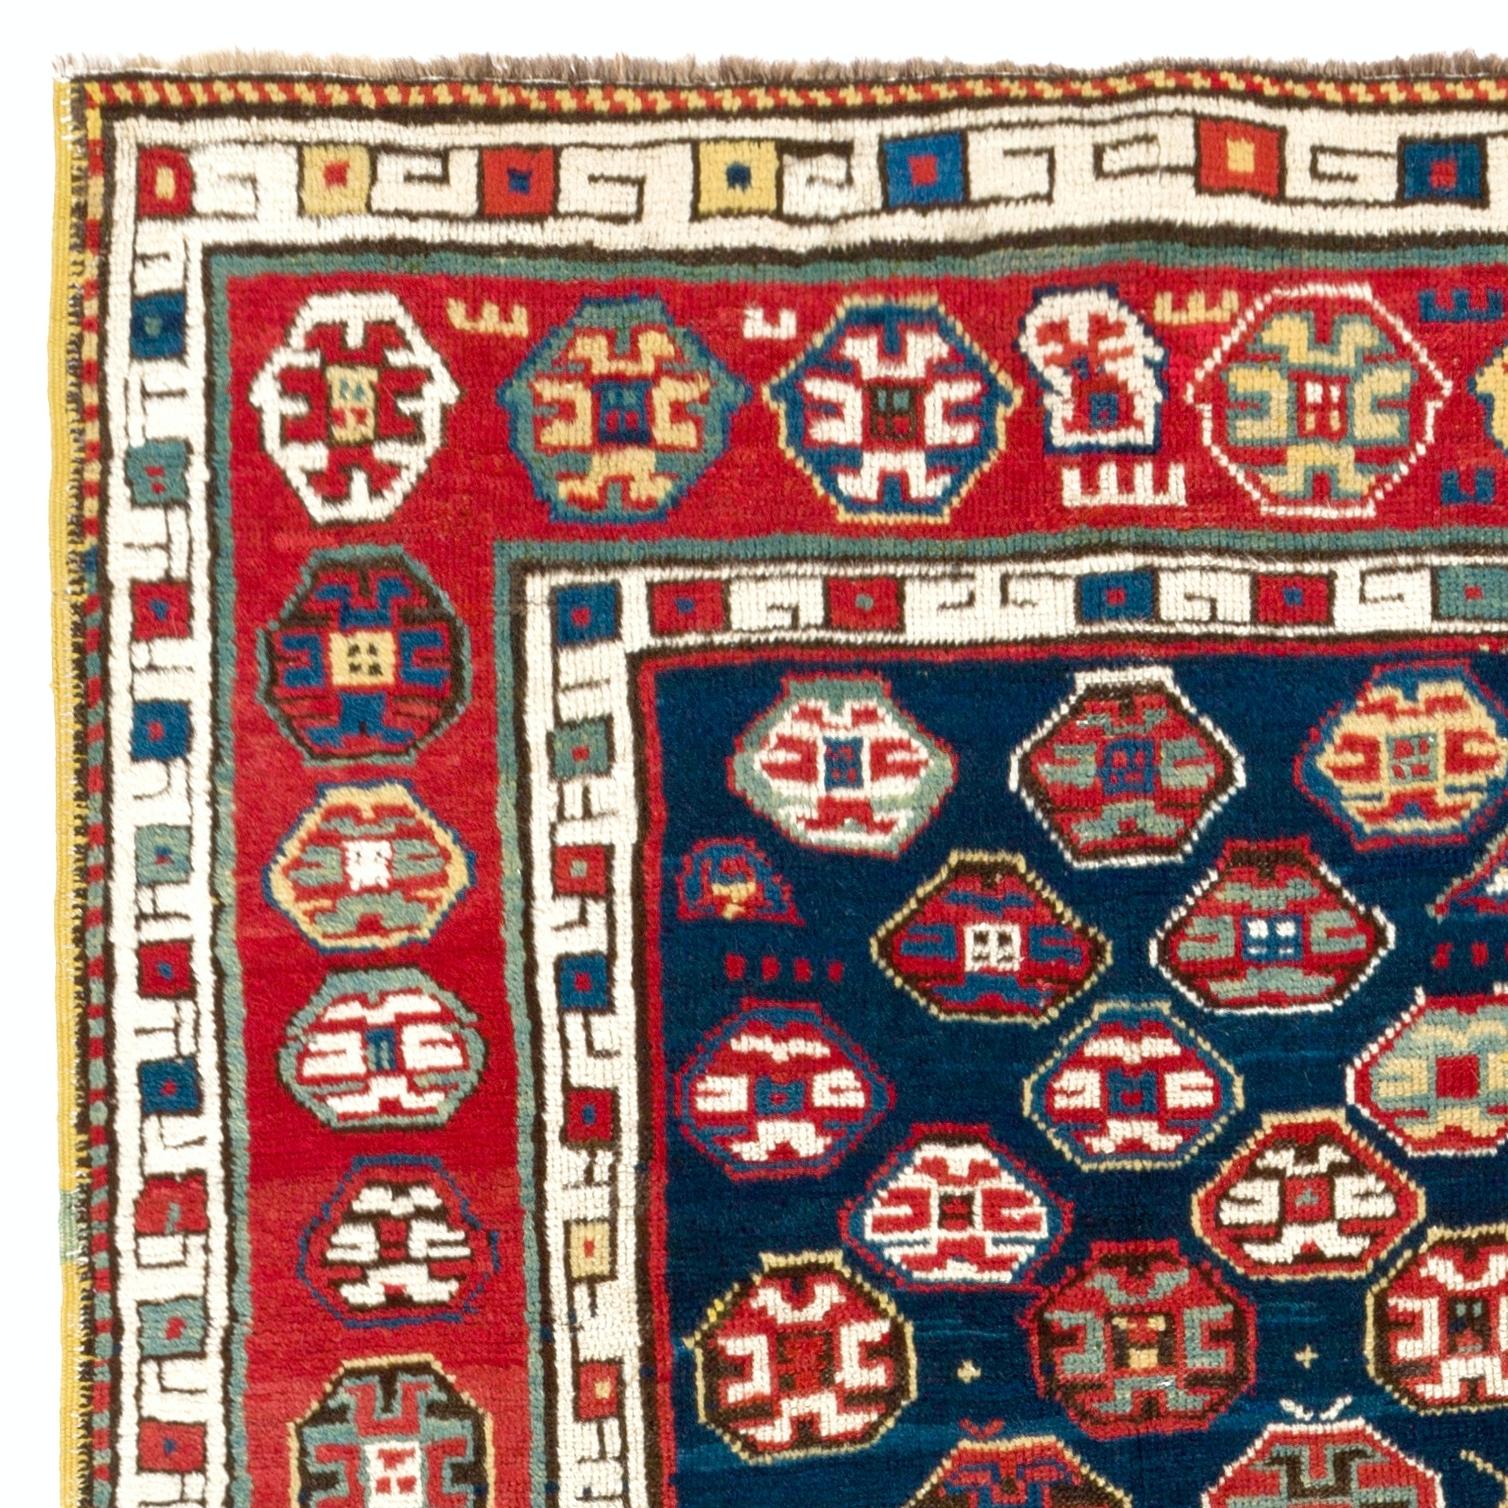 A traditional unique South East Caucasian Talish long rug with a beautiful geometric design. Note the little human and animal figures as well as the earrings, kites, flowers, combs and wheels of fortune motifs on the dark indigo blue field. A truly